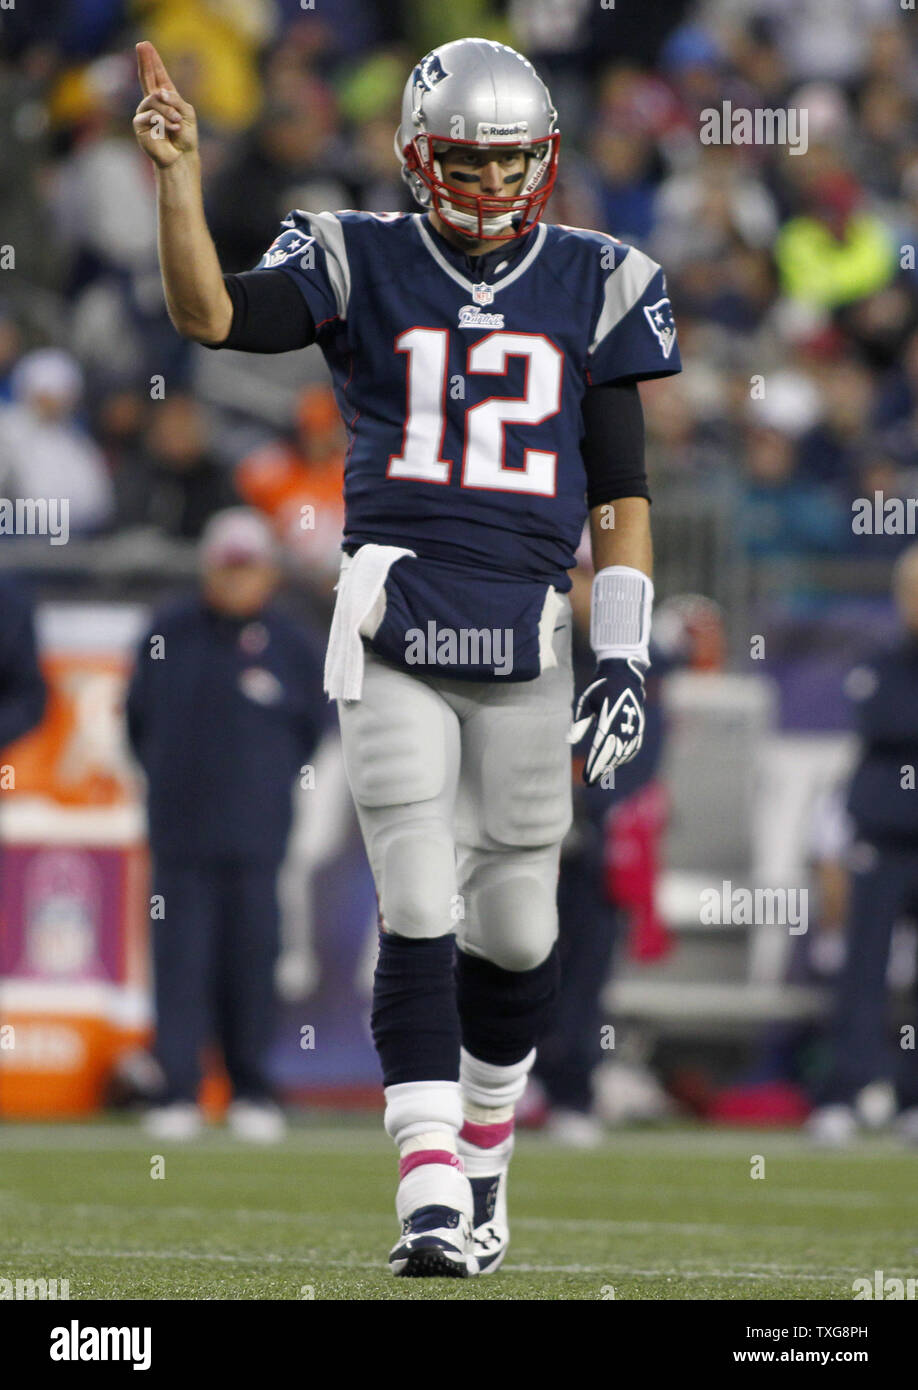 New England Patriots quarterback Tom Brady (12) makes a call over to the sideline in the third quarter against the Denver Broncos at Gillette Stadium in Foxboro, Massachusetts on October 7, 2012.  The Patriots defeated the Broncos 31-21.   UPI/Matthew Healey Stock Photo